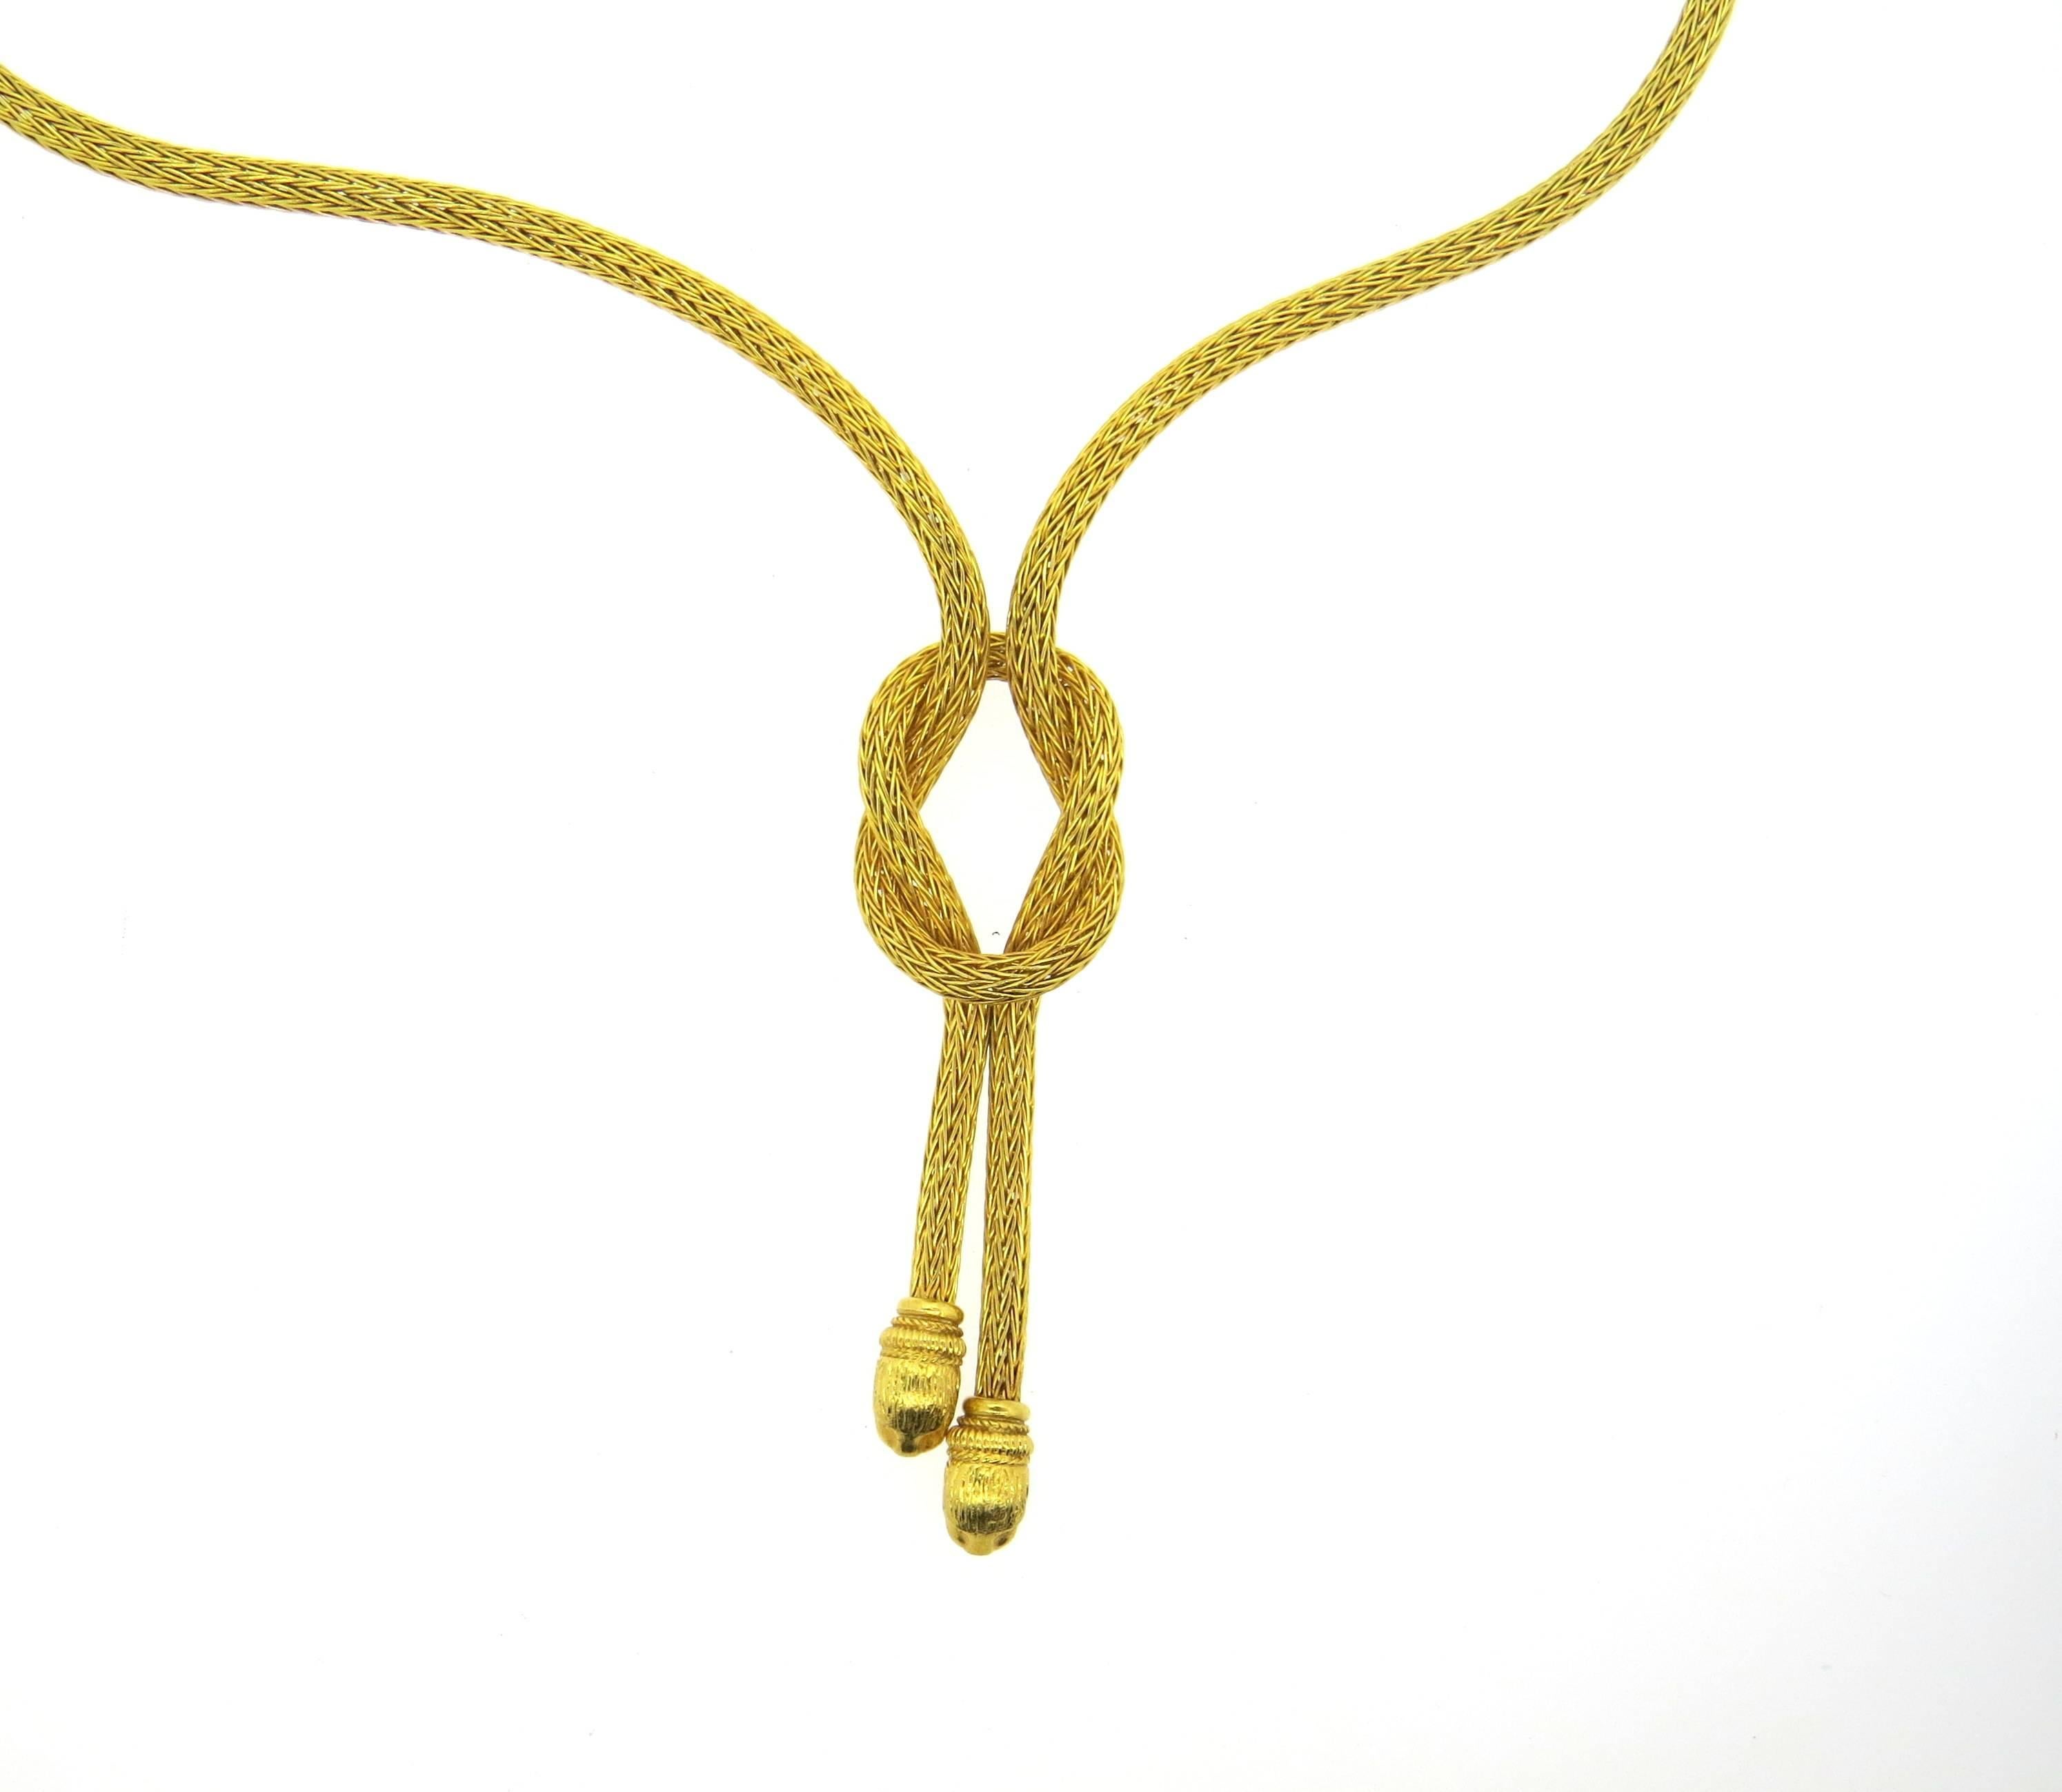 18k yellow gold necklace, crafted by Ilias lalaounis, featuring a knot with two chimera heads on the ends. Necklace's wearable length is 19